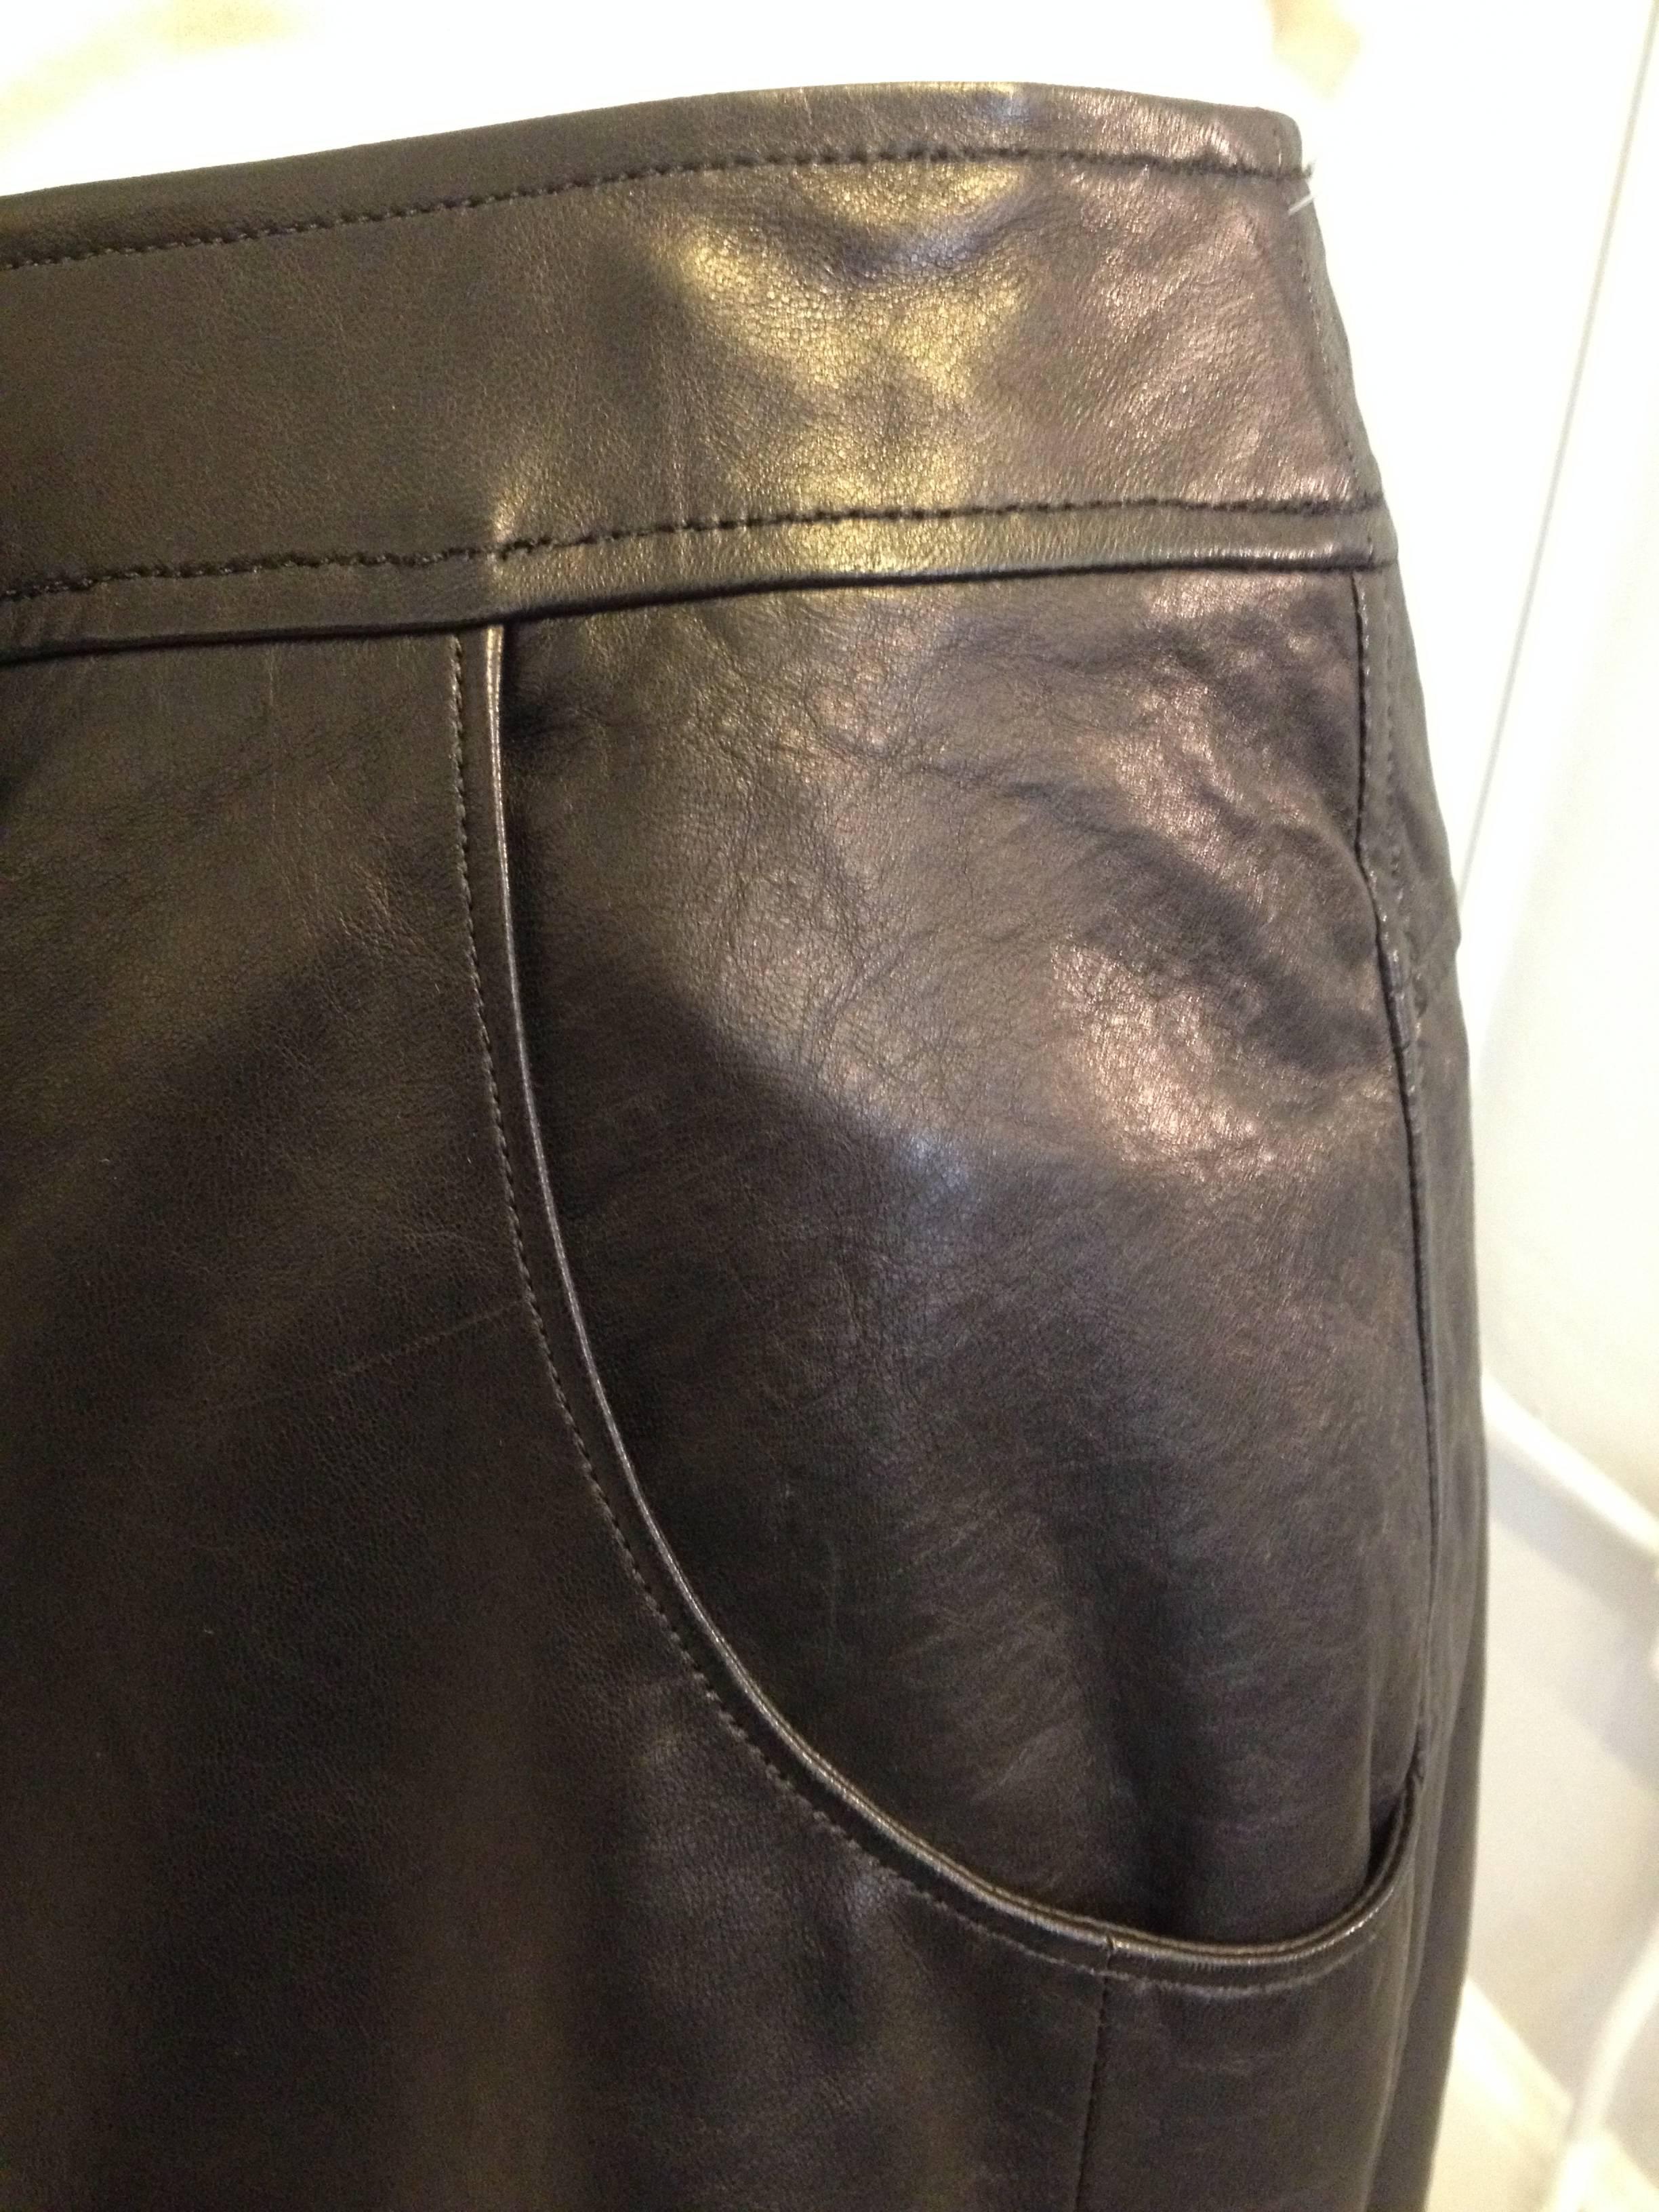 Women's Chanel Black Leather Culottes Size 42 (10) For Sale